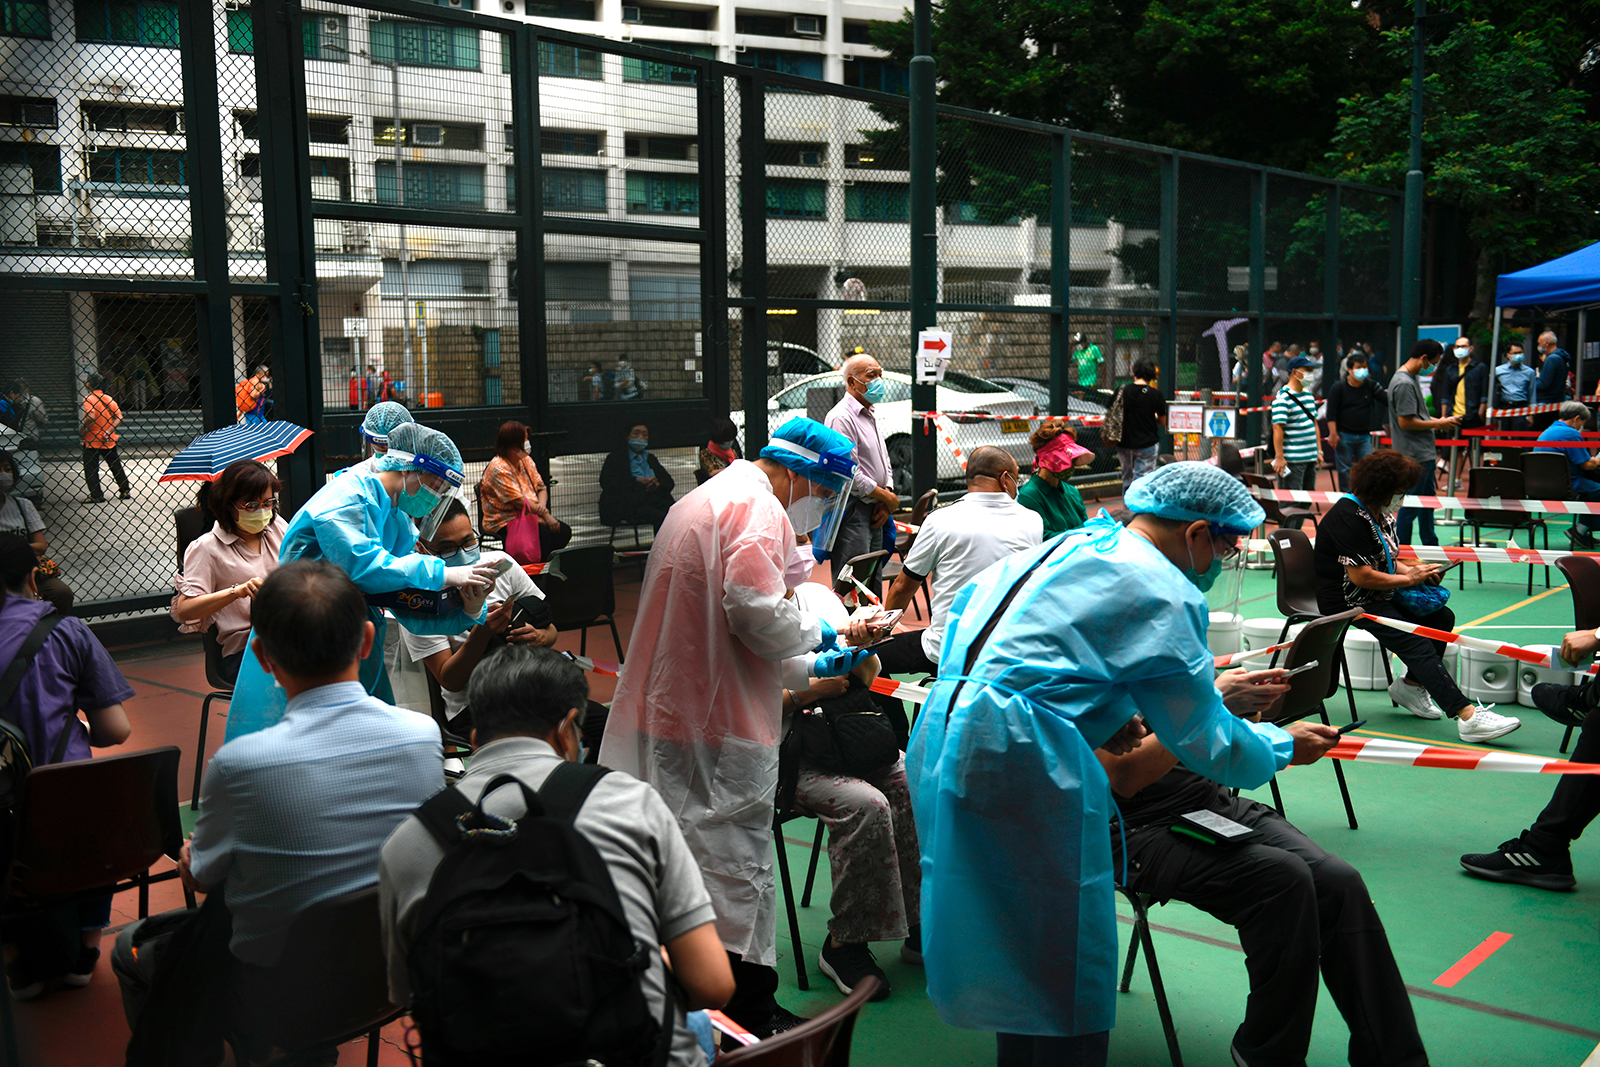 Workers wearing Personal Protection Equipment(PPE) are seen attending to people waiting for a test at a Covid-19 testing center  in Hong Kong, on November 24.